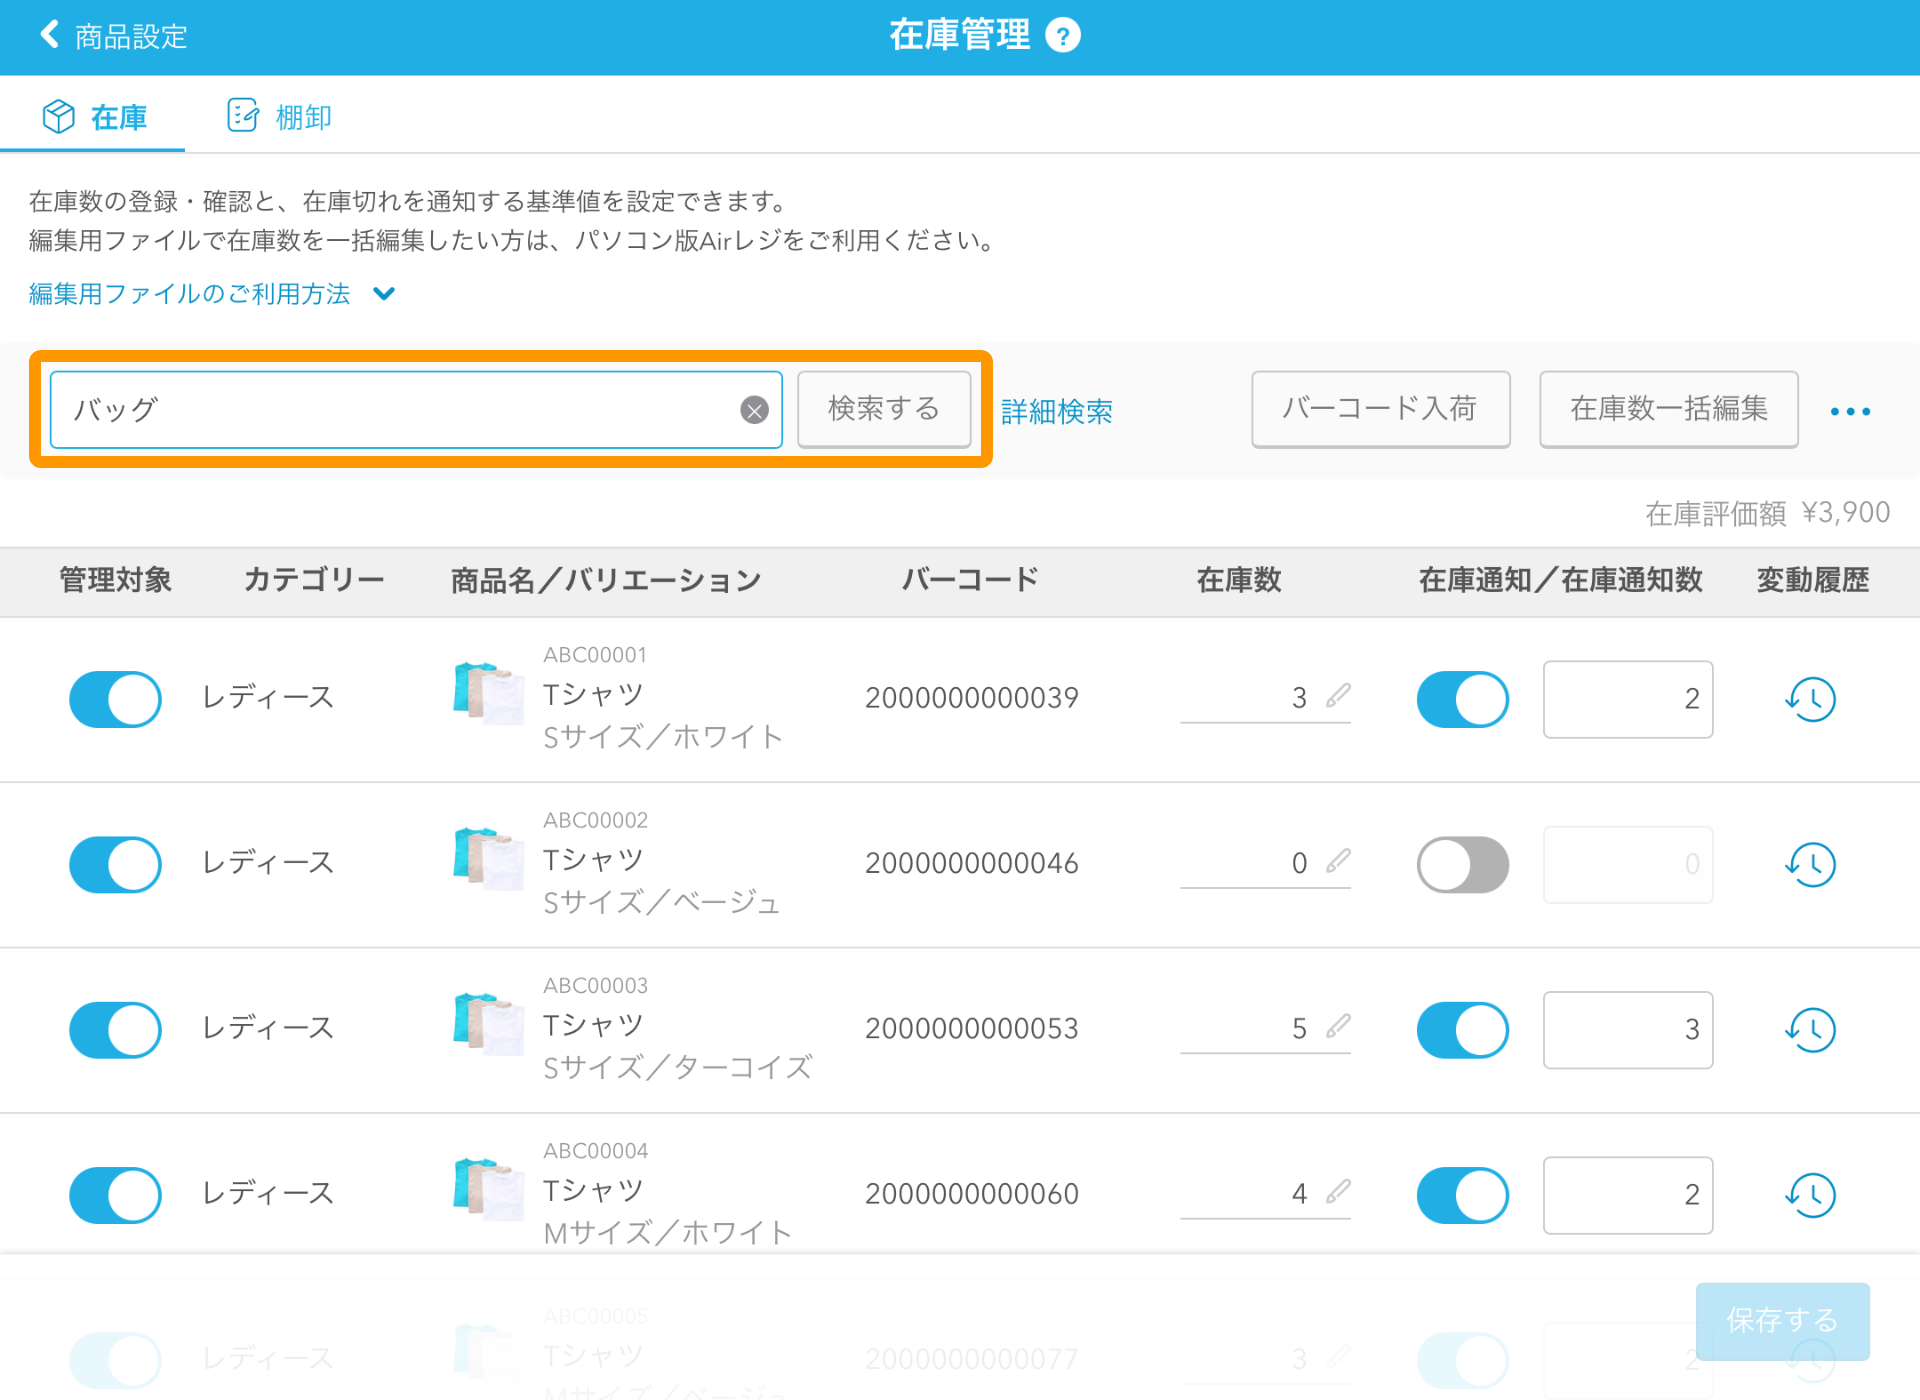 06 Airレジ 在庫管理画面 検索する